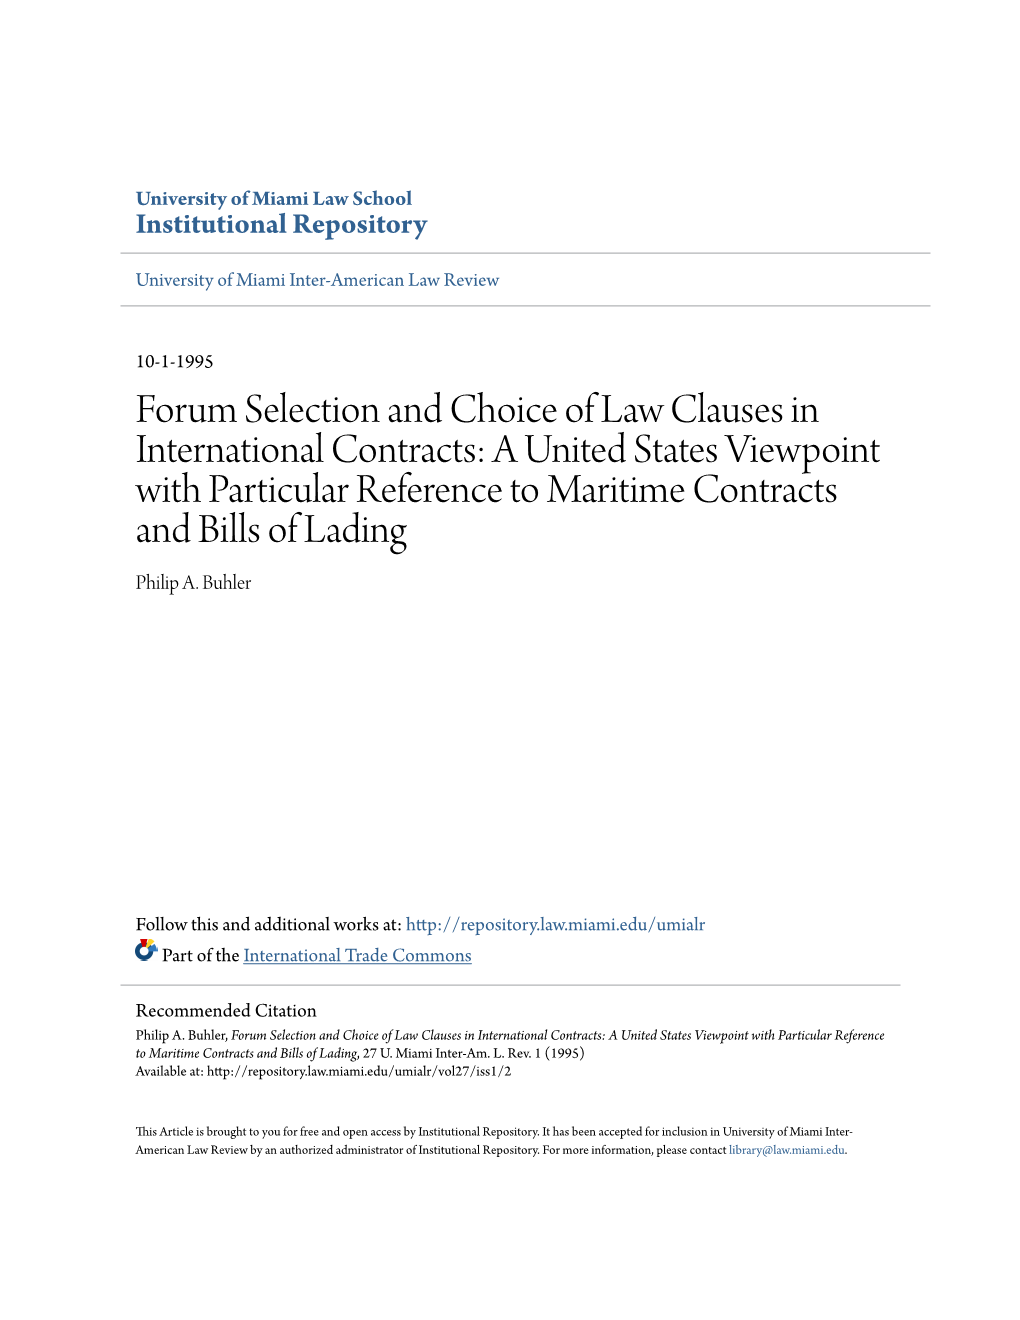 Forum Selection and Choice of Law Clauses in International Contracts